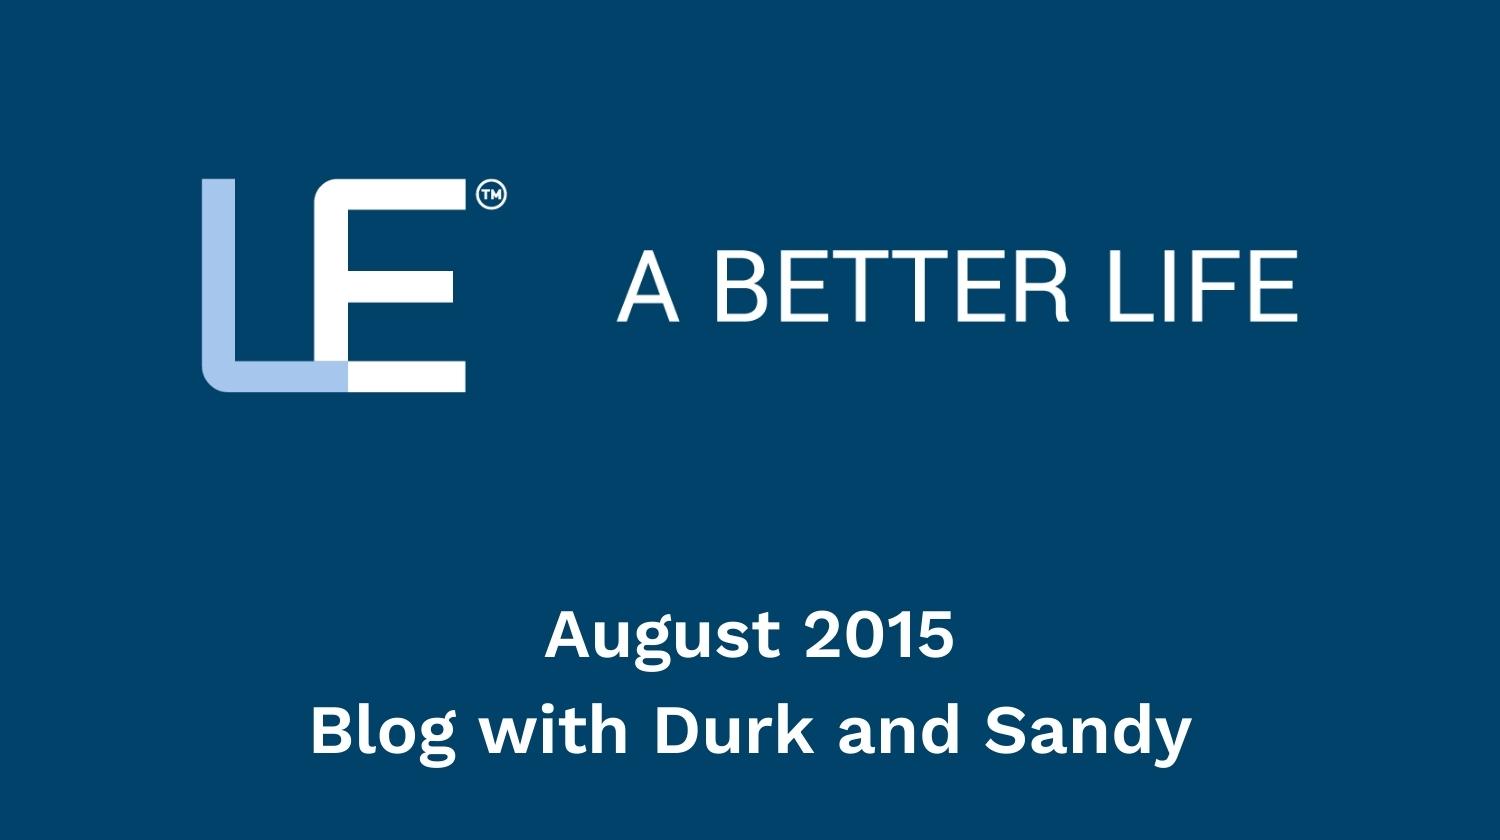 August 2015 Blog with Durk and Sandy